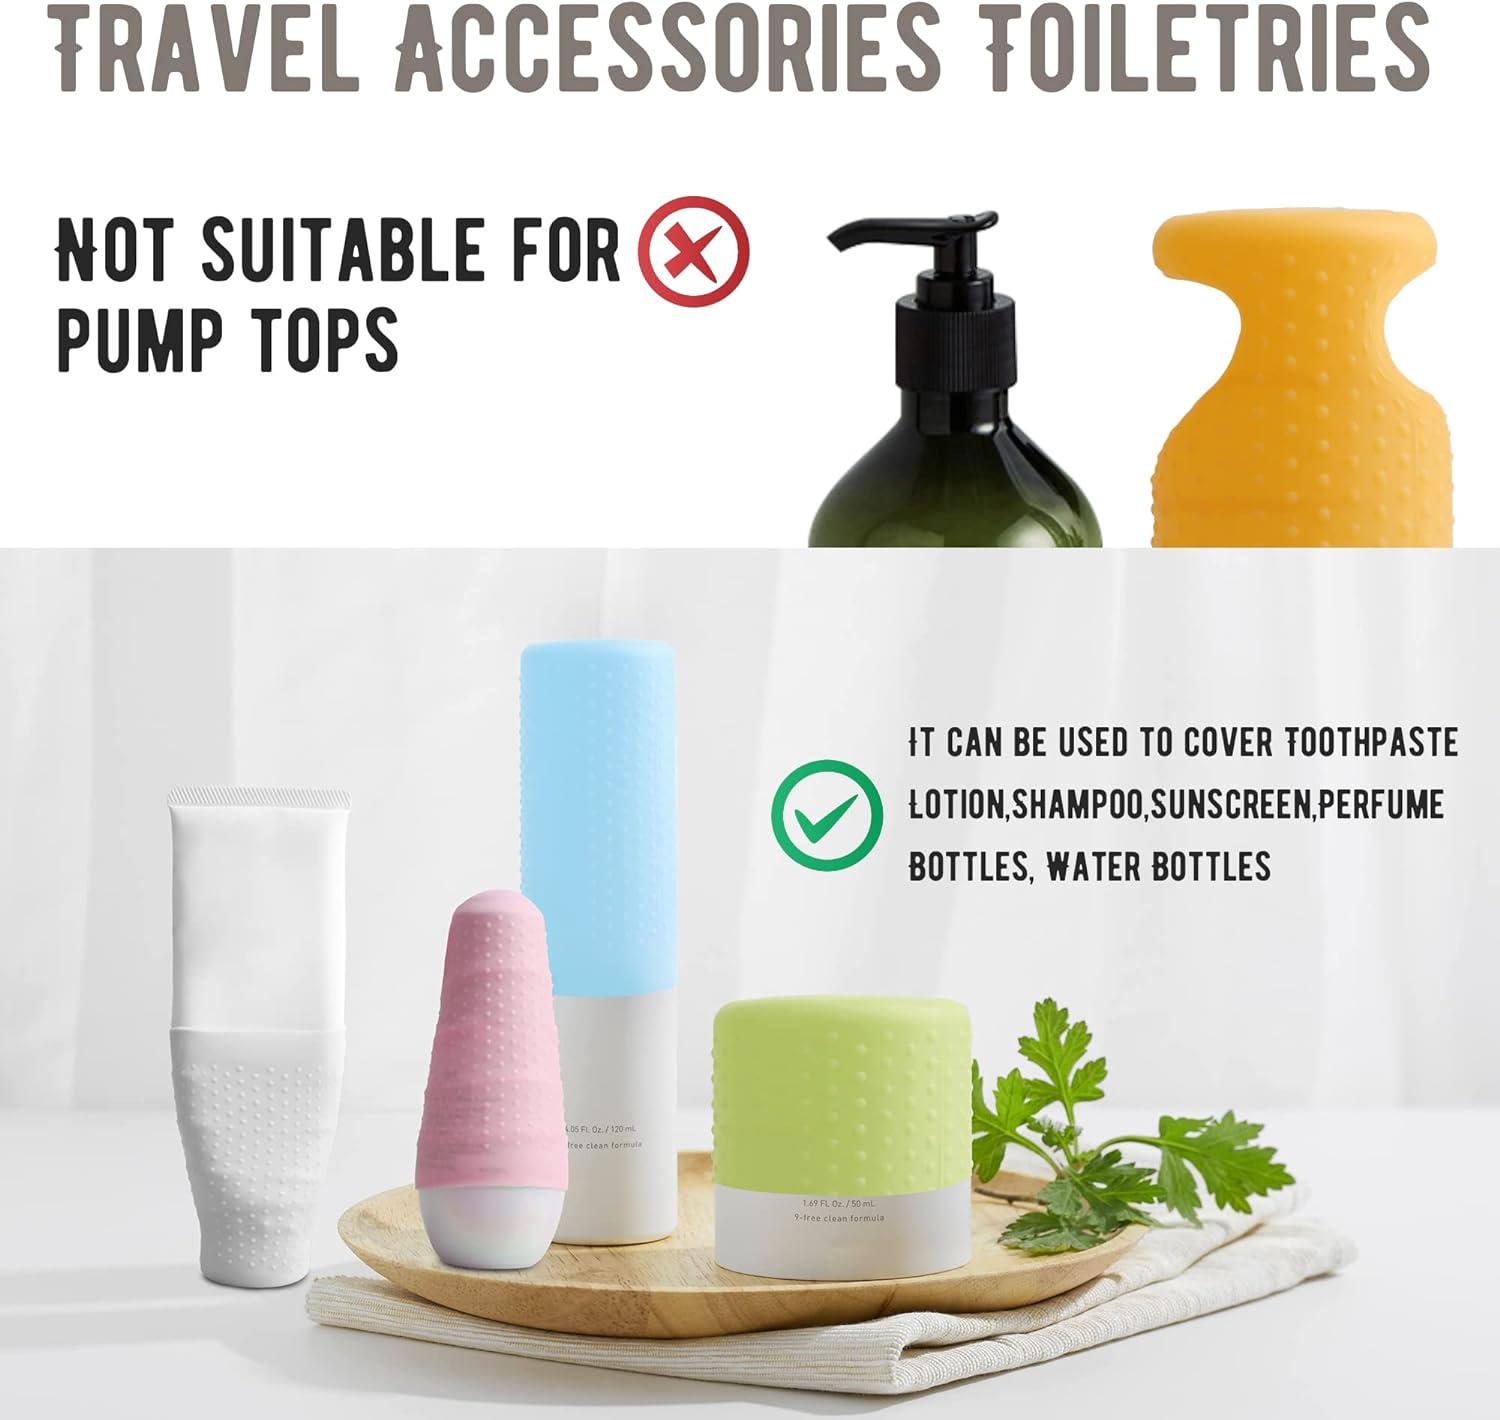 Leak Proof Silicone Travel Bottle Covers Elastic Sleeves for Toiletries